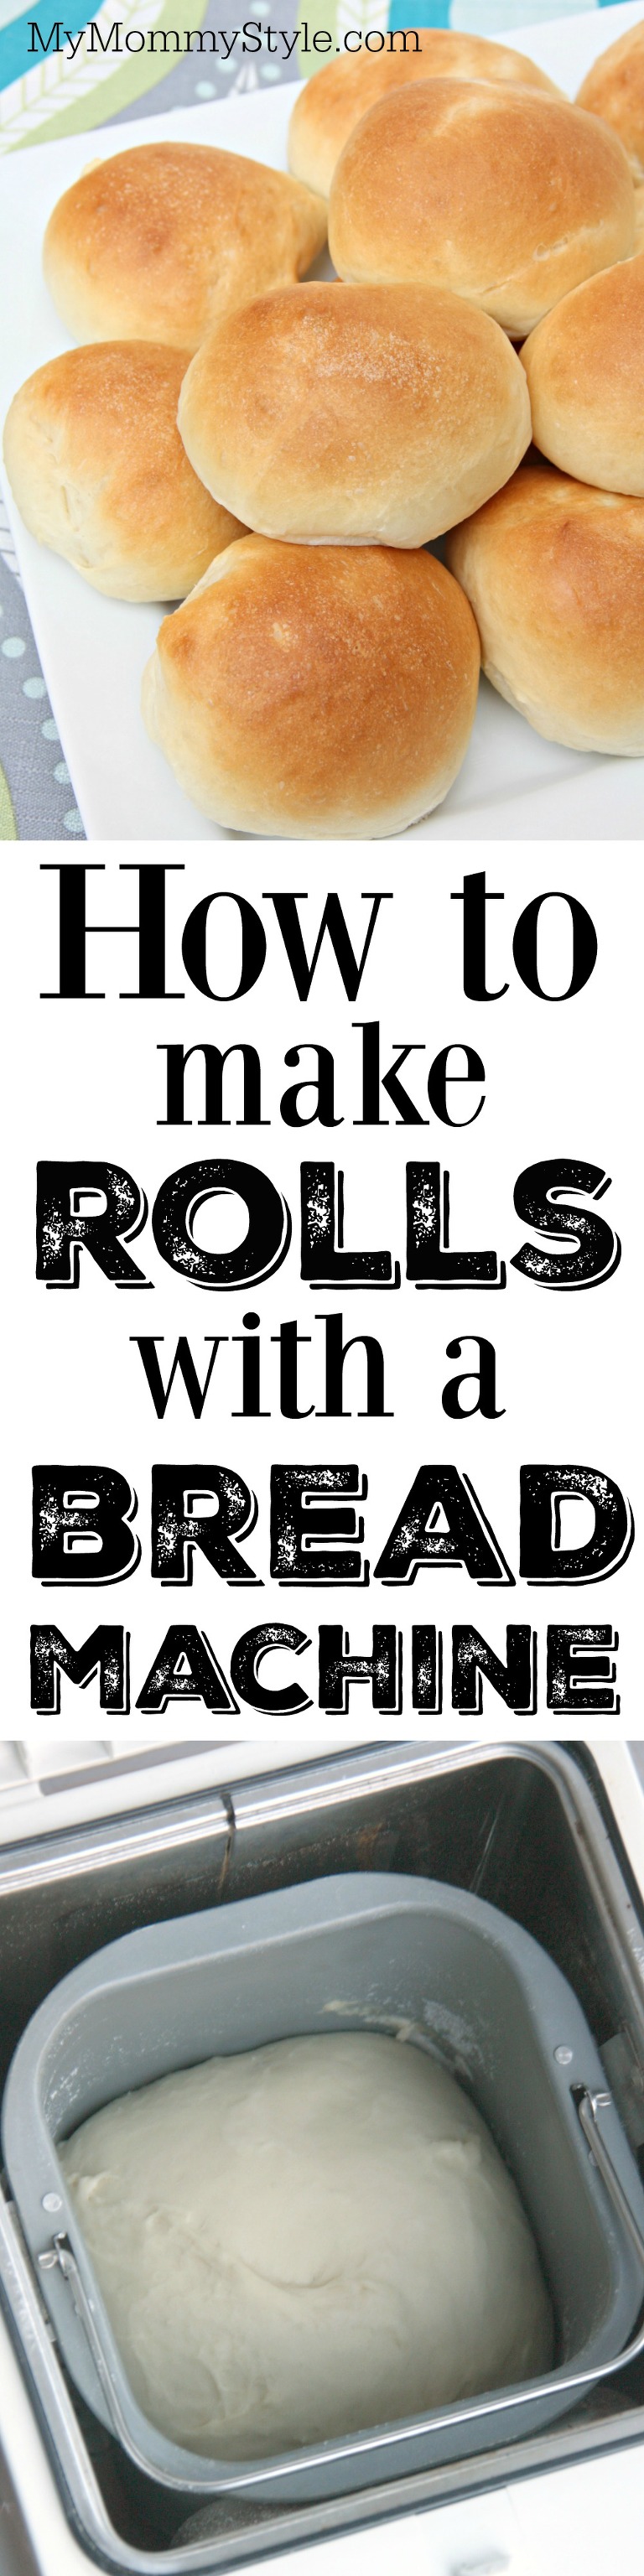 How to make rolls with a bread machine